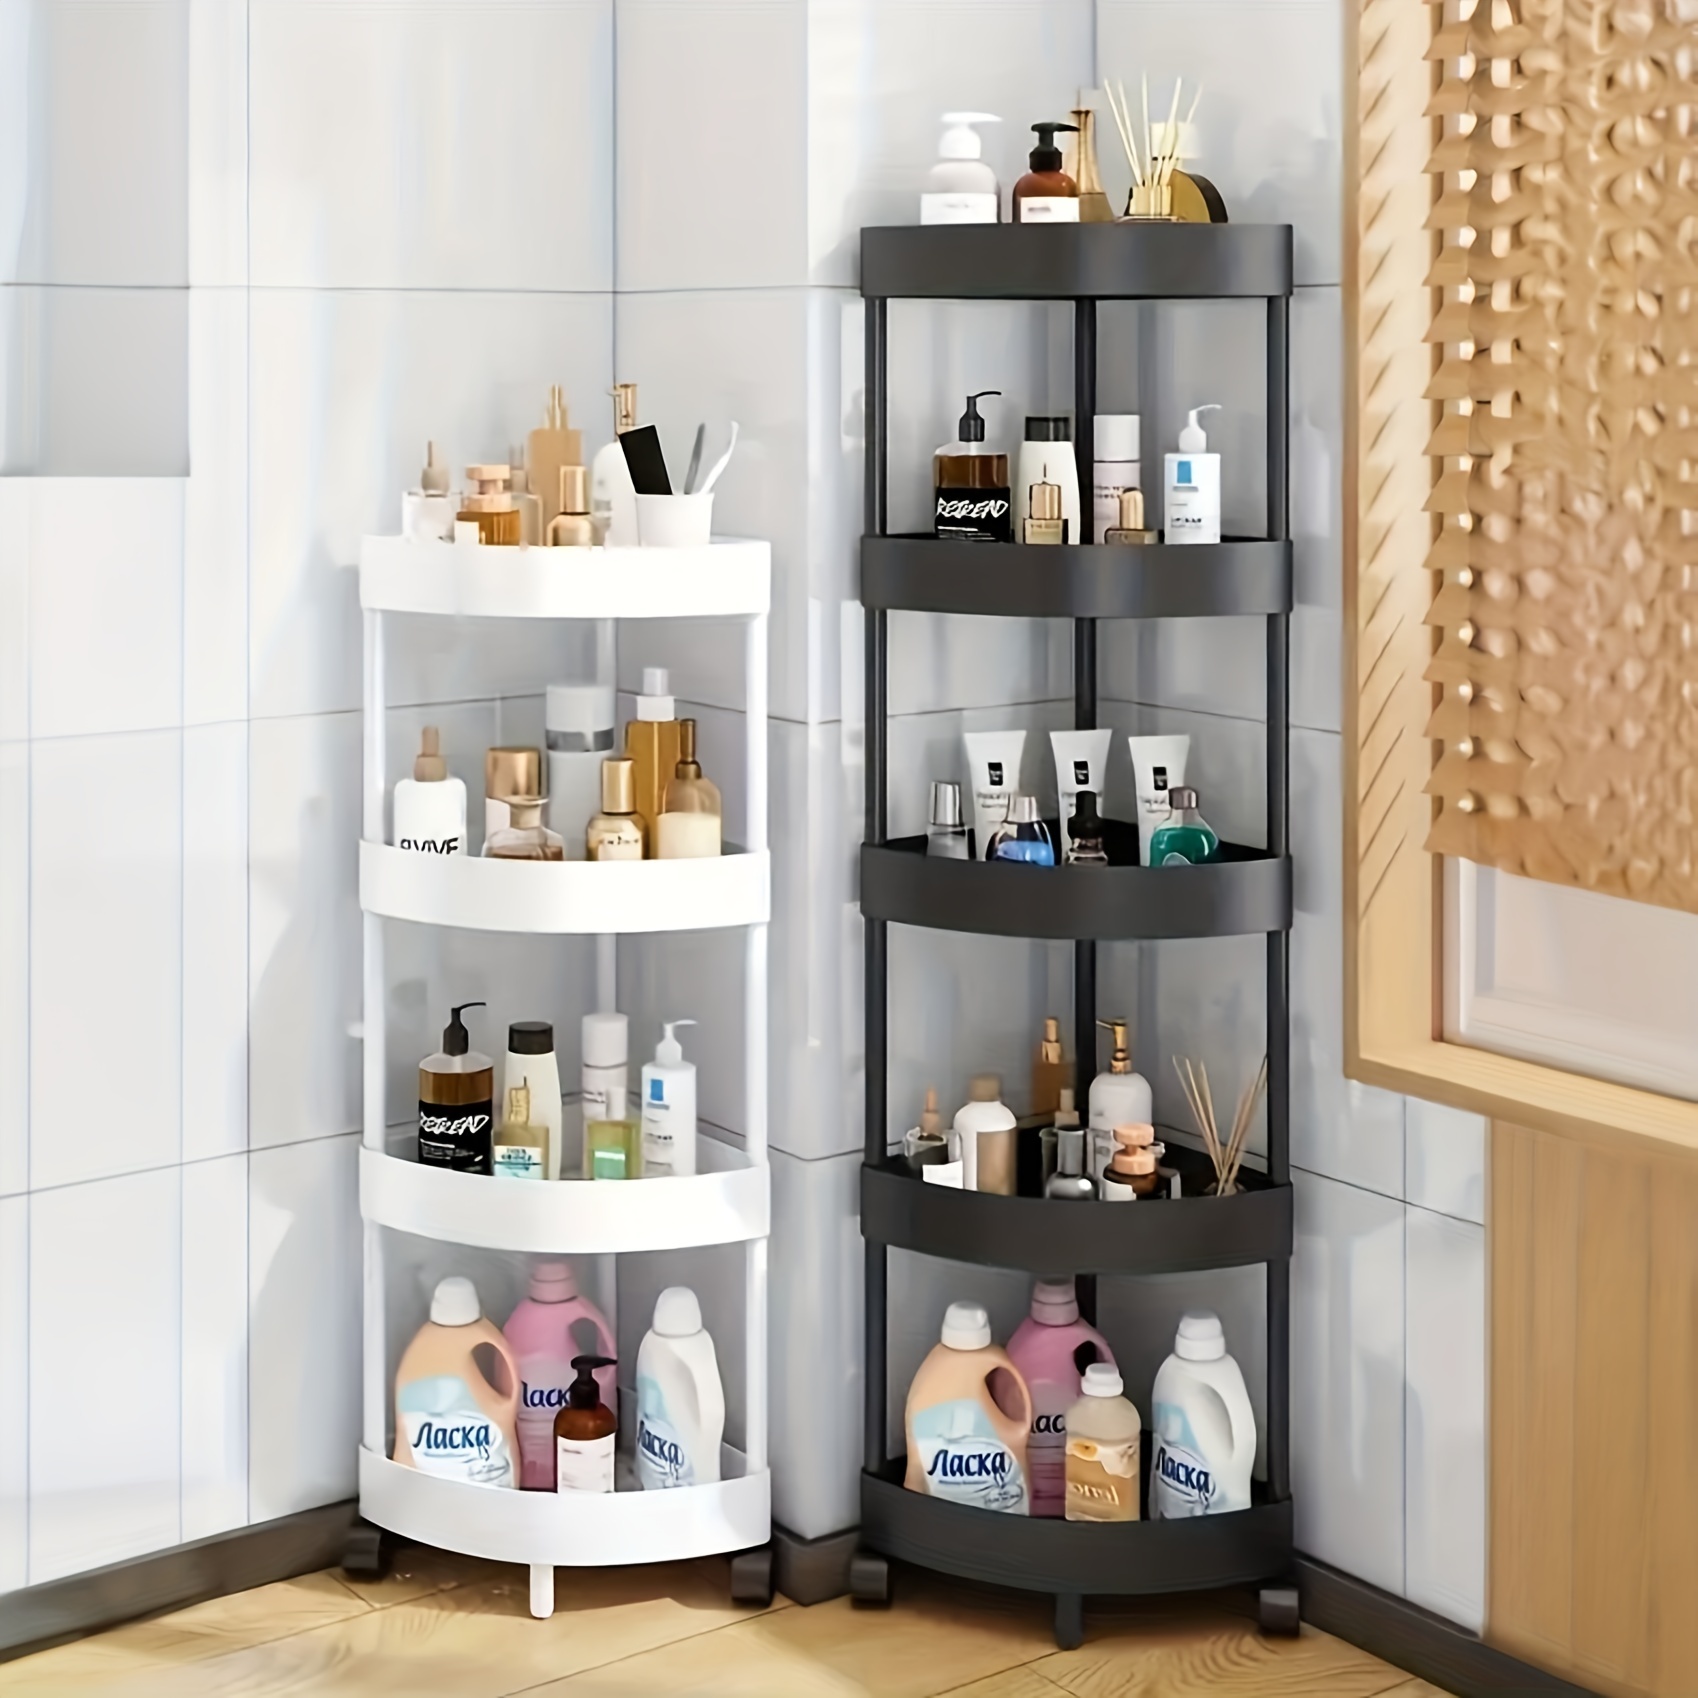 How to Use Bathroom Shelves to Organize Your Space